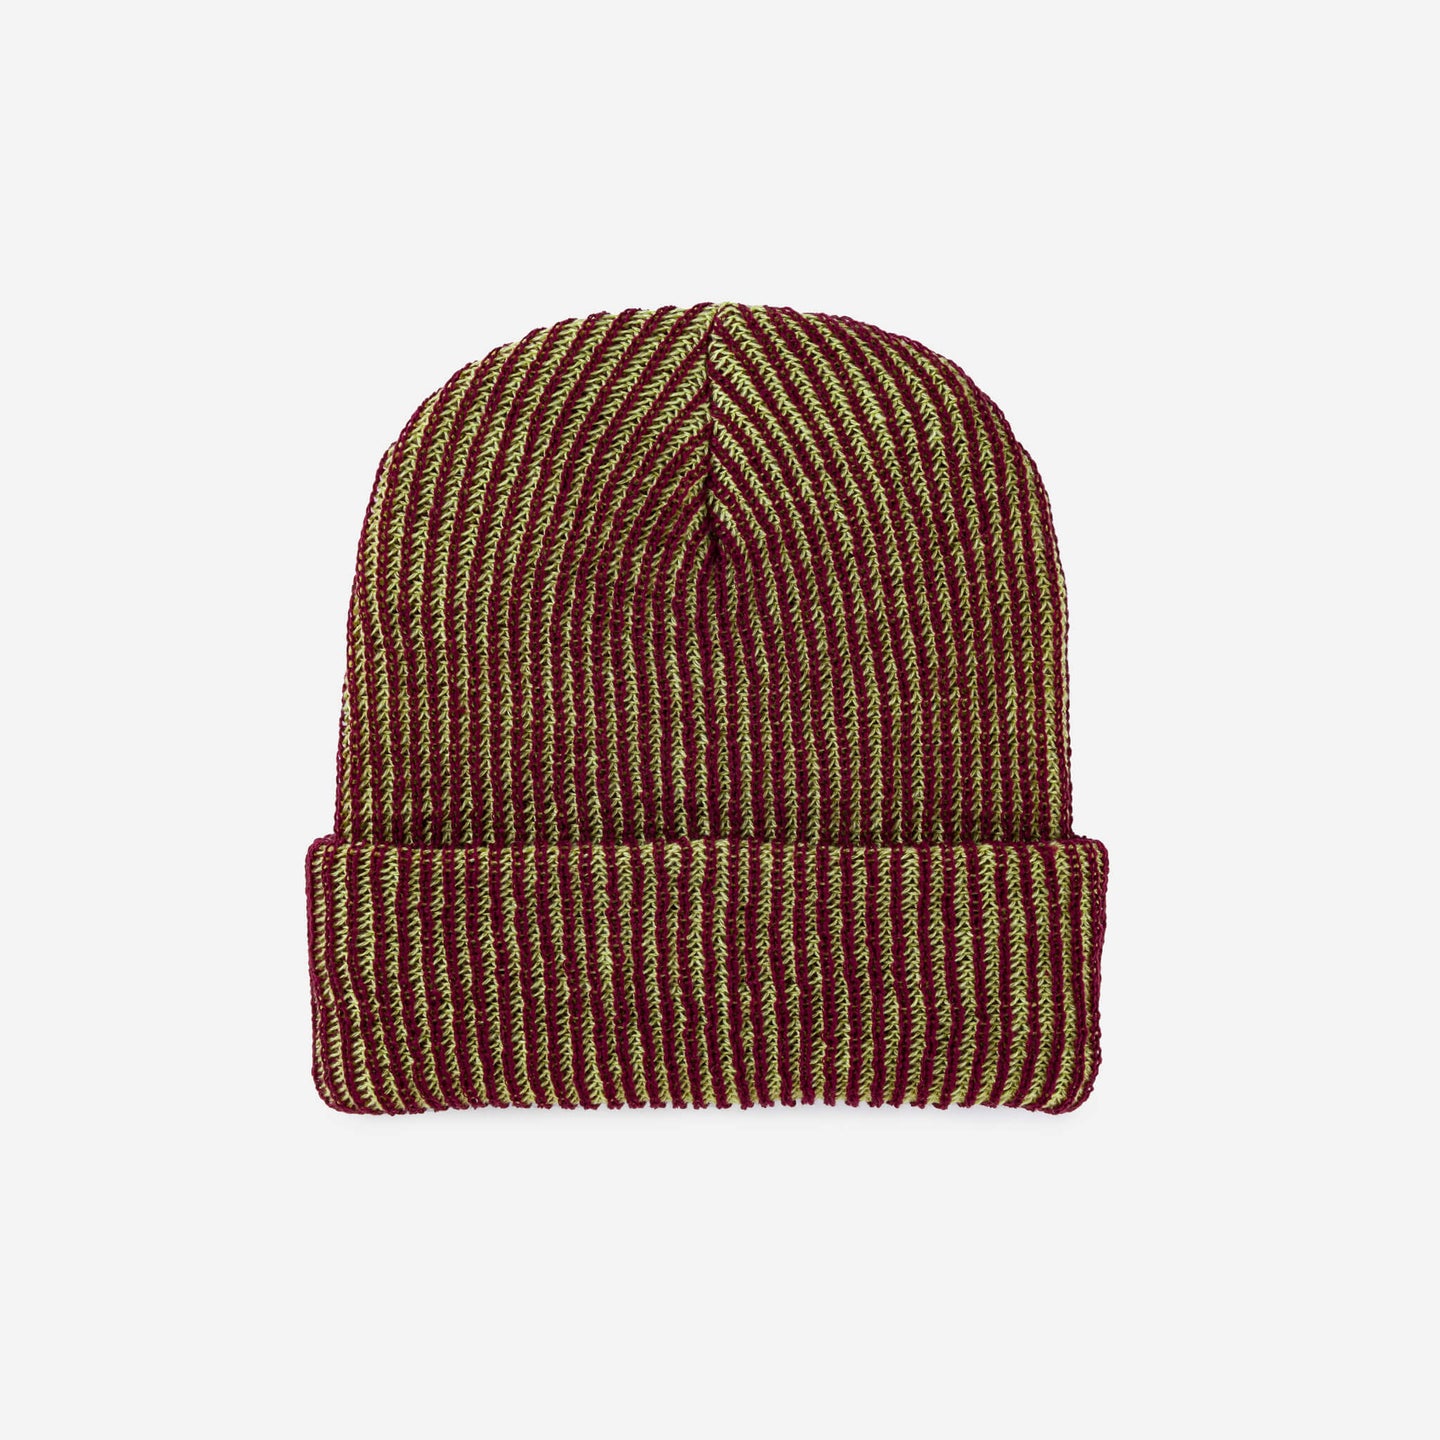 Simple Rib Hat Contrast Stripe Slouchy Beanie Knit Unisex mens one size